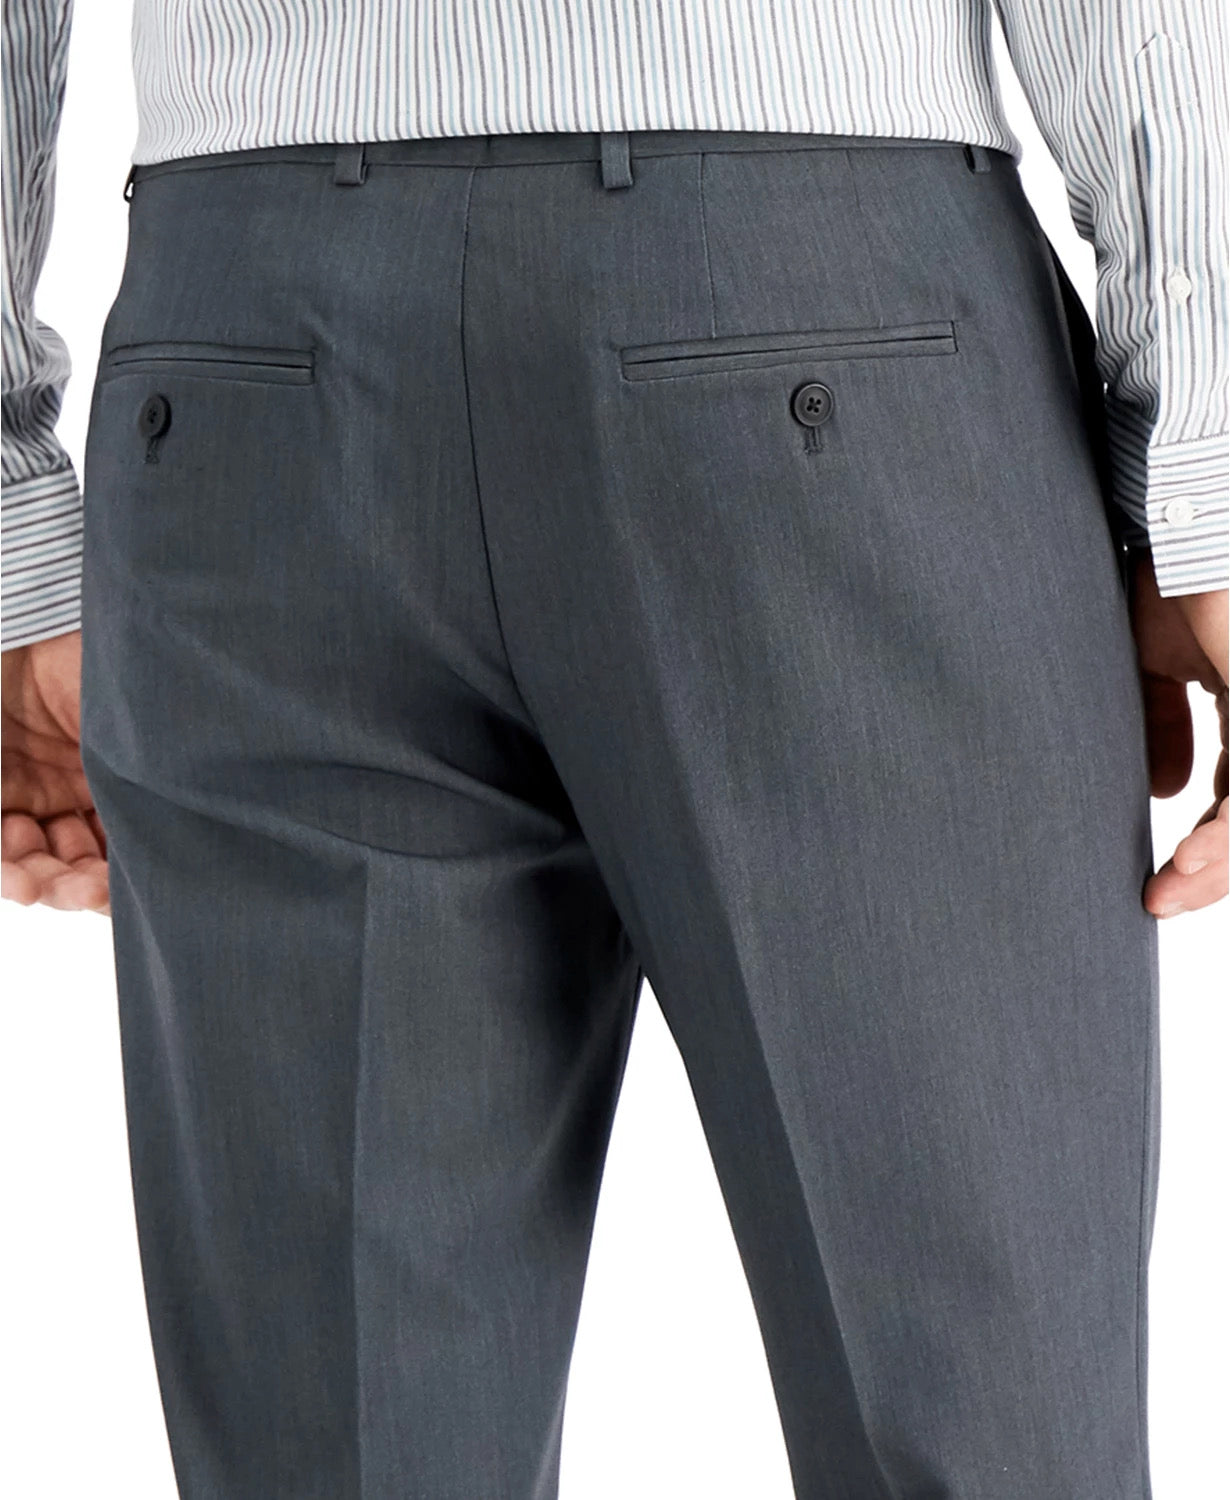 Perry Ellis Mens Pants Smoked Pearl 38 x 32 Grey Modern-Fit Stretch Solid